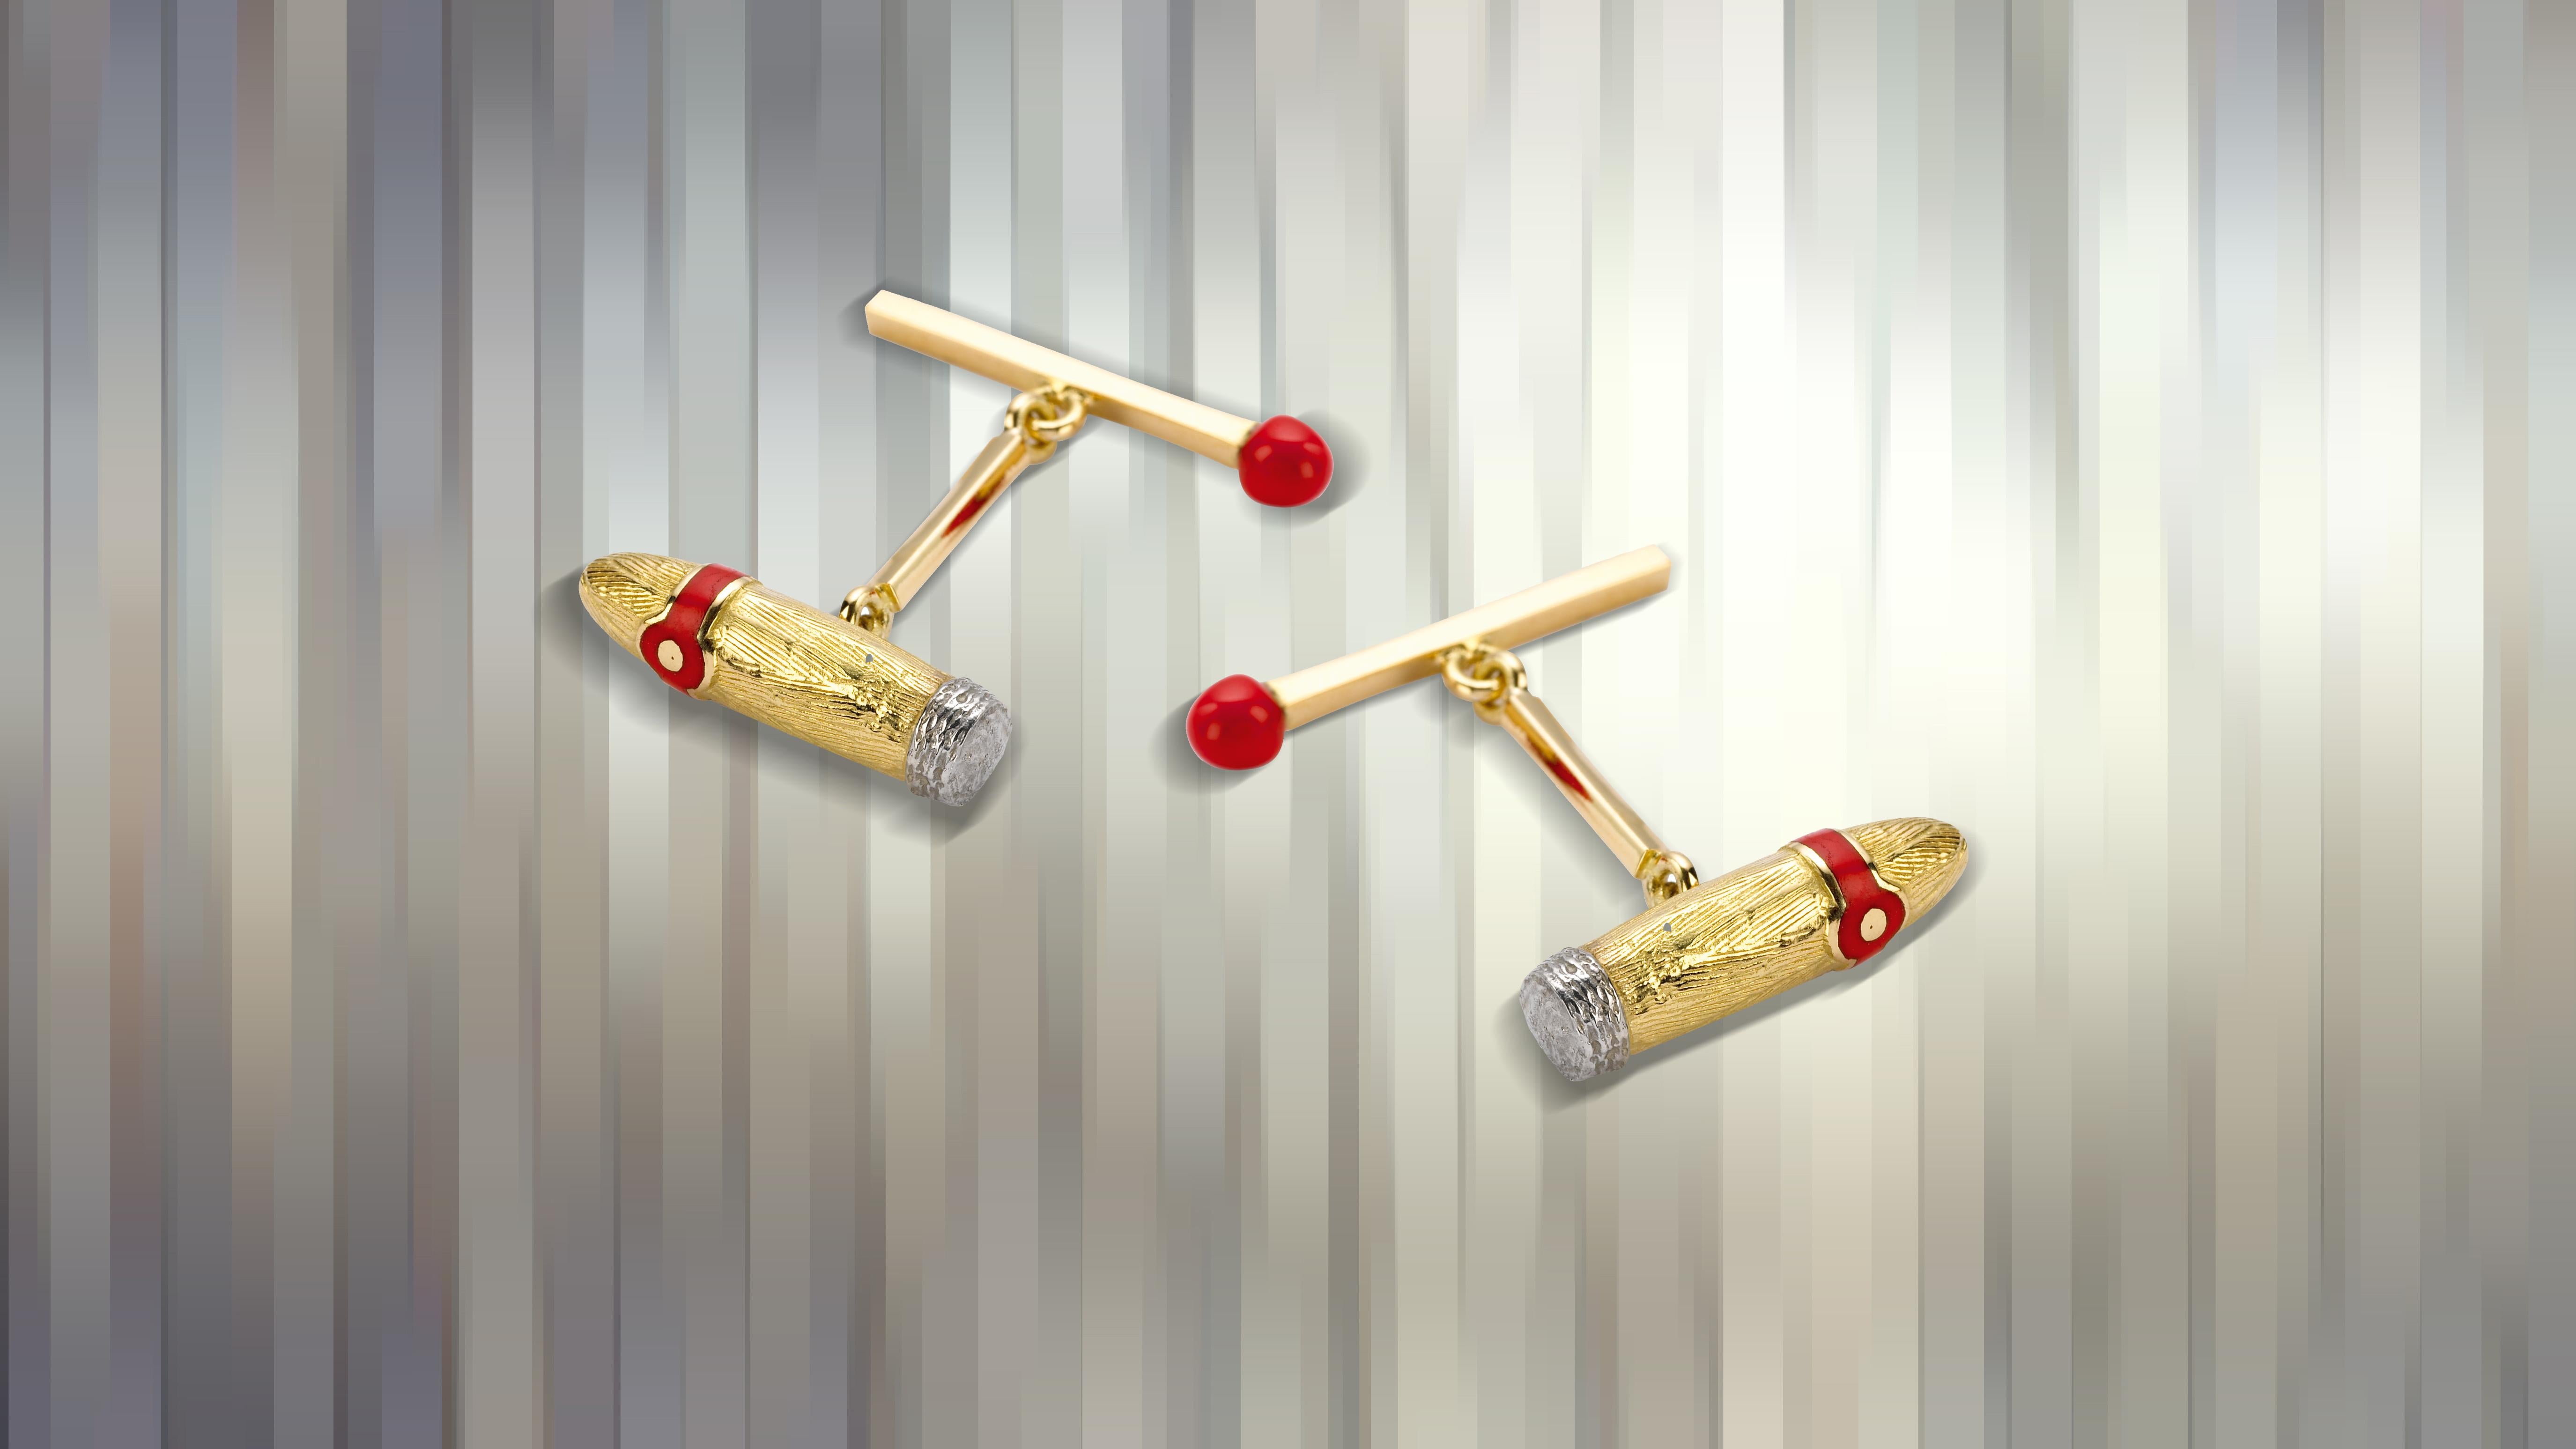 DEAKIN & FRANCIS, Piccadilly Arcade, London

For the connoisseurs who know the joy of a fine cigar chased with a tot of whisky, the 18ct yellow gold Cigar & Match Cufflinks from Deakin & Francis are the ideal accessory. 
Handcrafted in the English